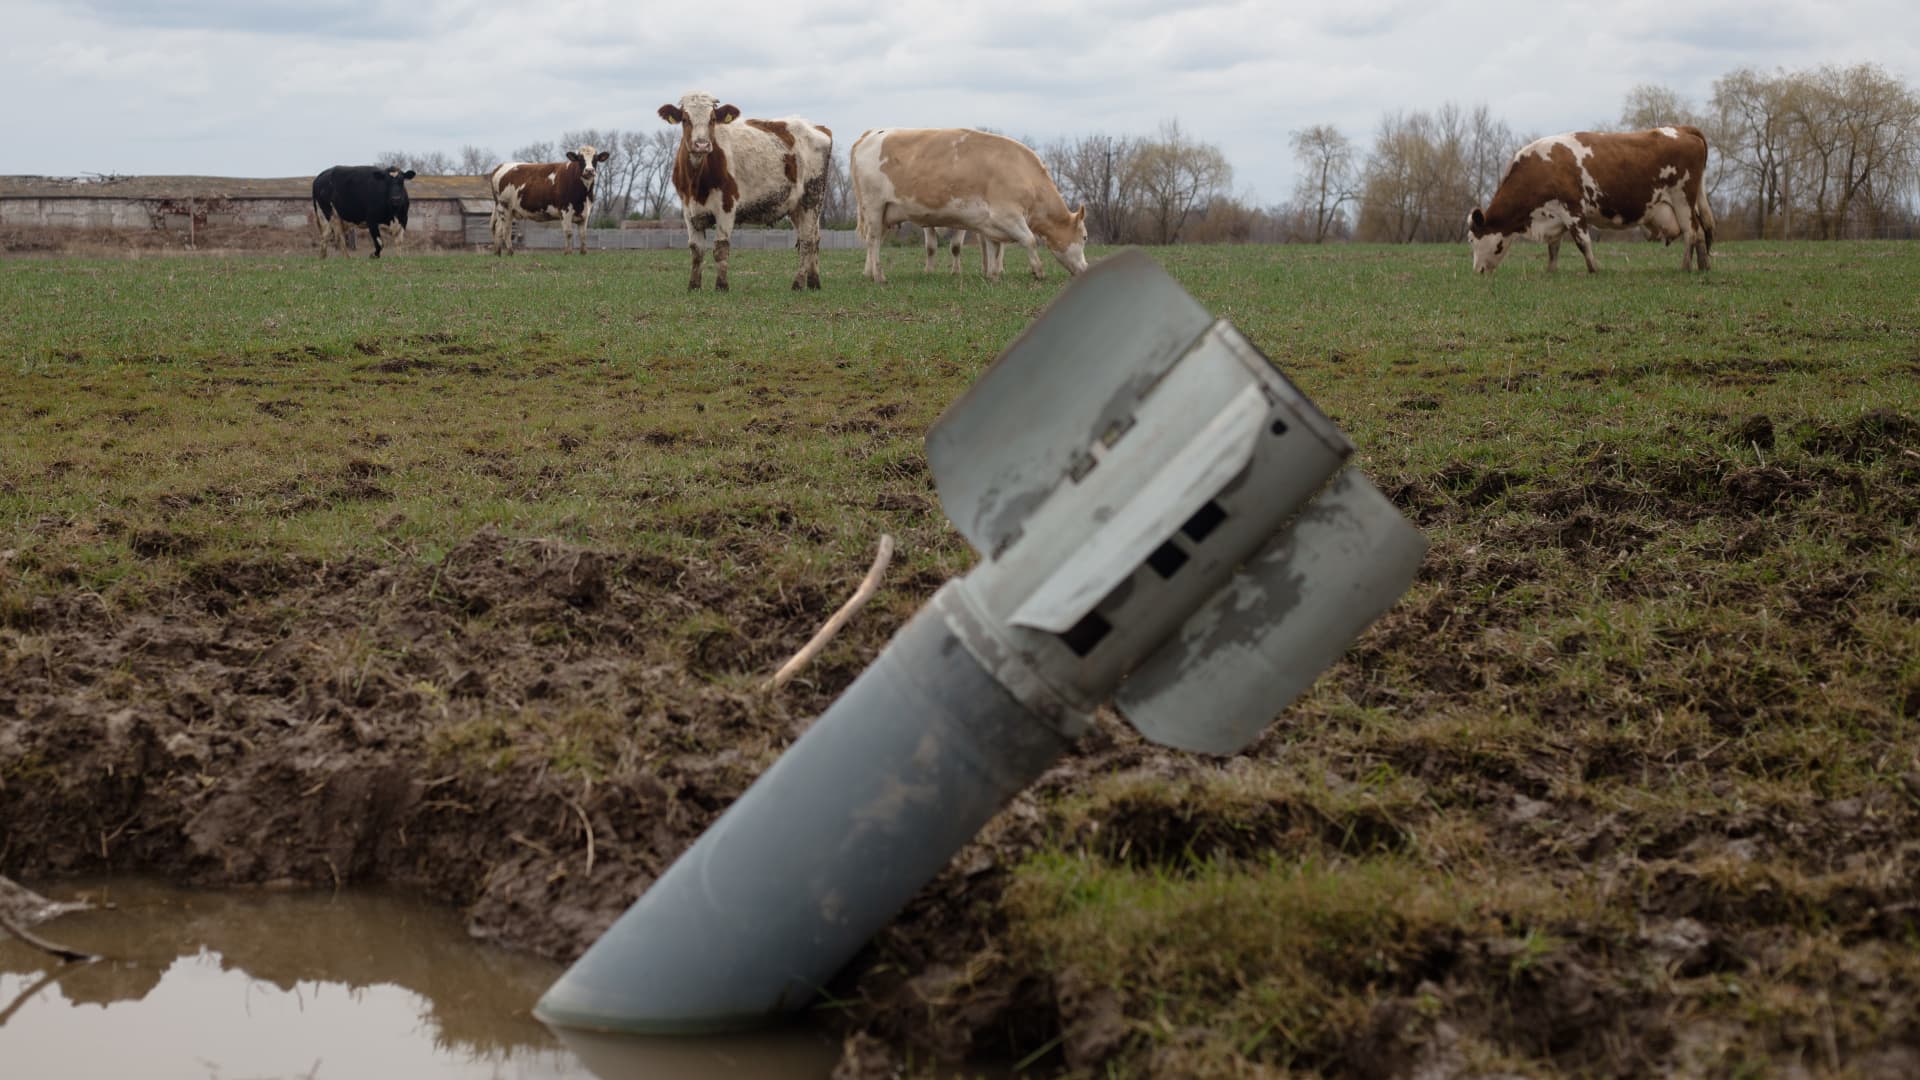 A Russian ballistic weapon lies in the middle of a Ukrainian farmer's field. Russian disruption of Ukrainian commerce is seen taking a staggering 45.1% off Ukraine's GDP this year, according to the World Bank.